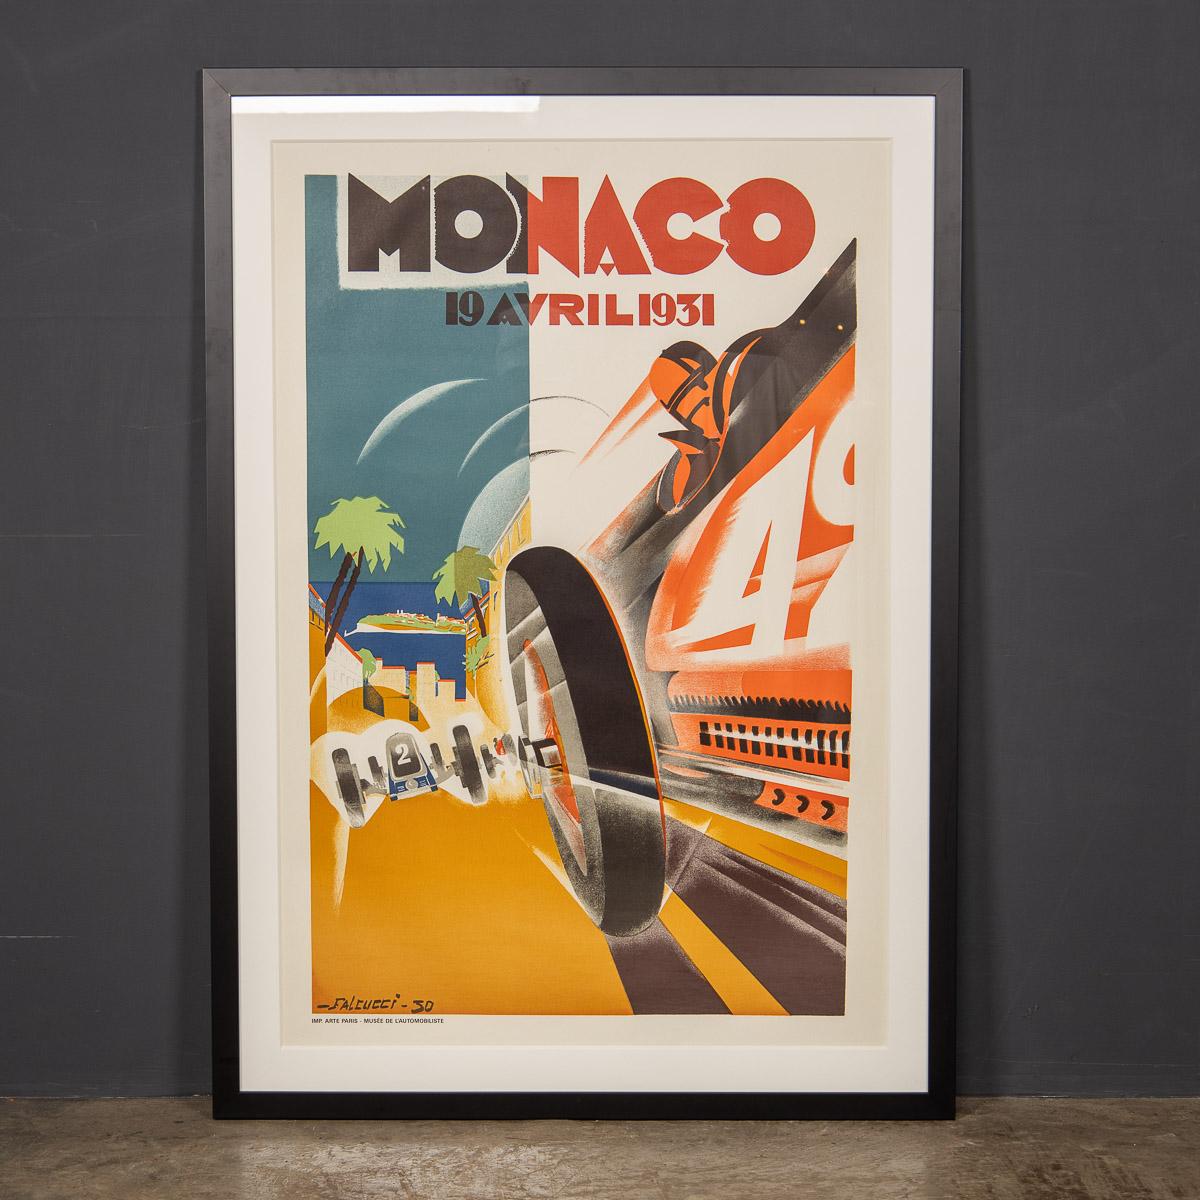 A 20th Century Reprint (circa 1960s) of the Monaco 1931 Grand-prix poster, signed Falcucci, 30.

This superb posters comes with a timeless made to measure frame.


Condition
In great condition - no damage.

Size
Width: 82cm
Height: 116cm.